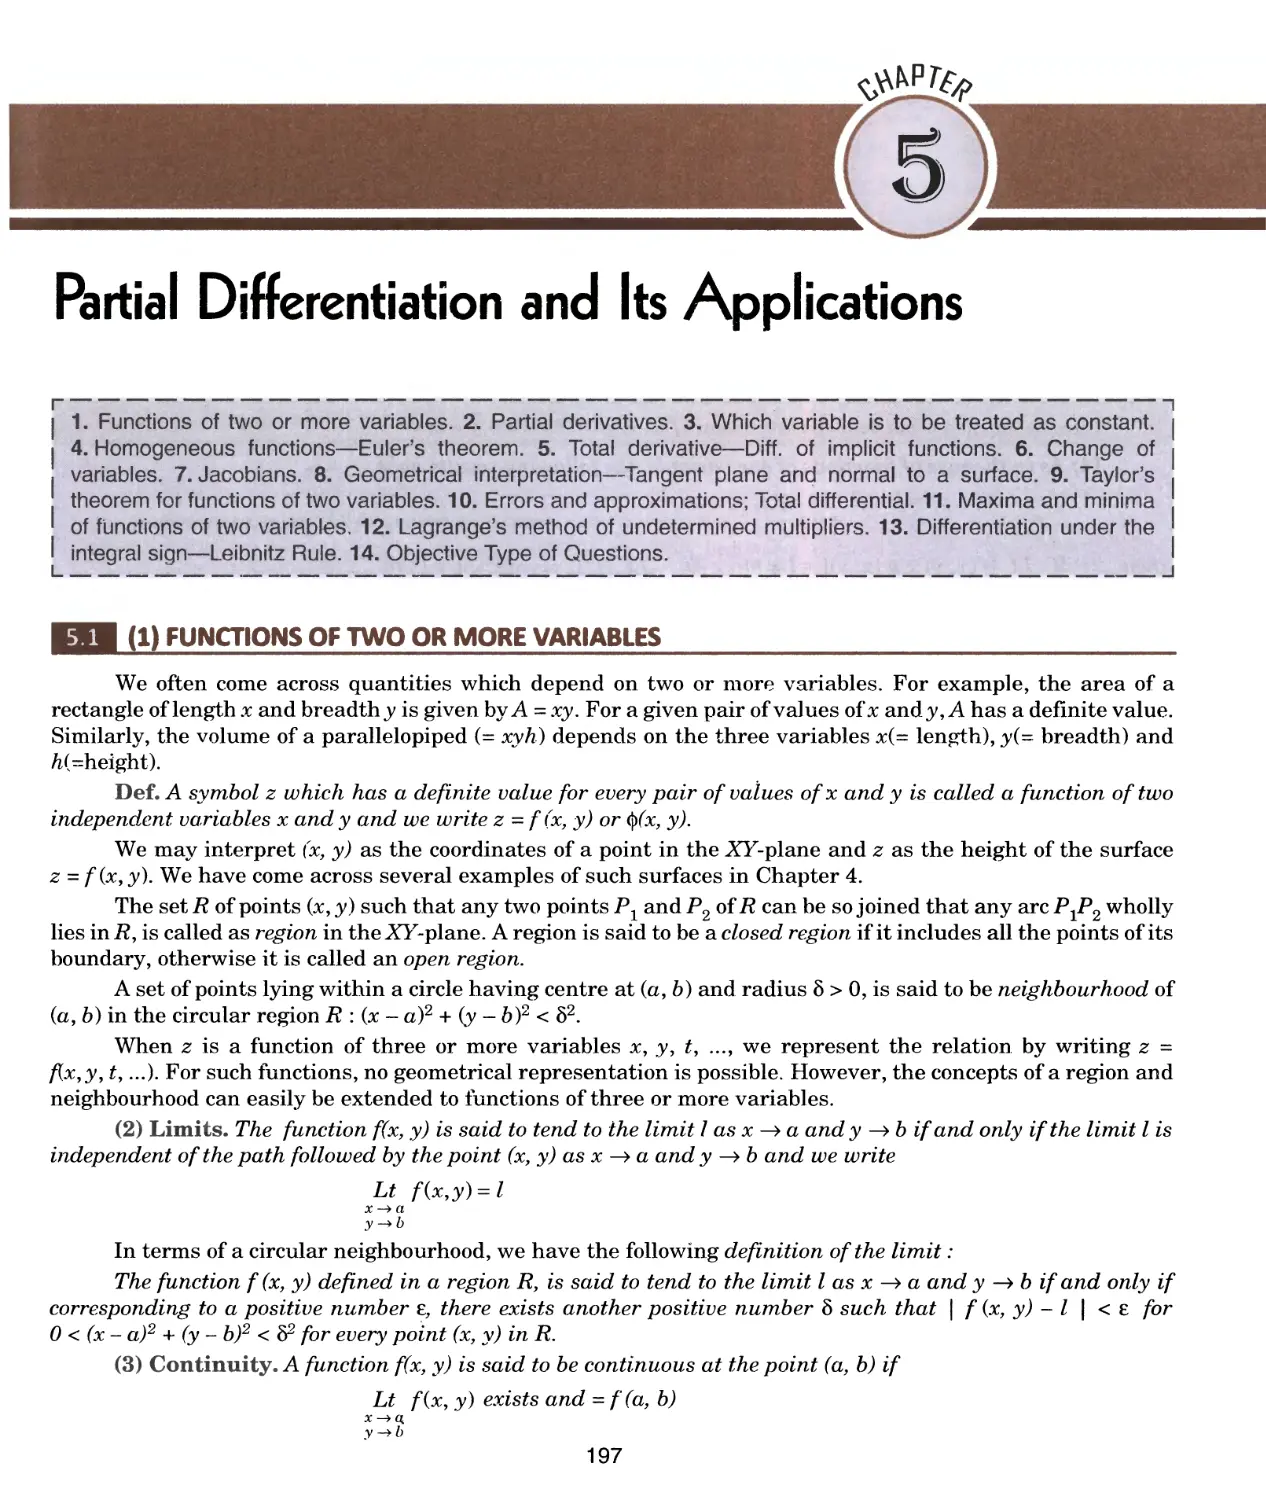 5.Partial Differentiation & Its Applications 197